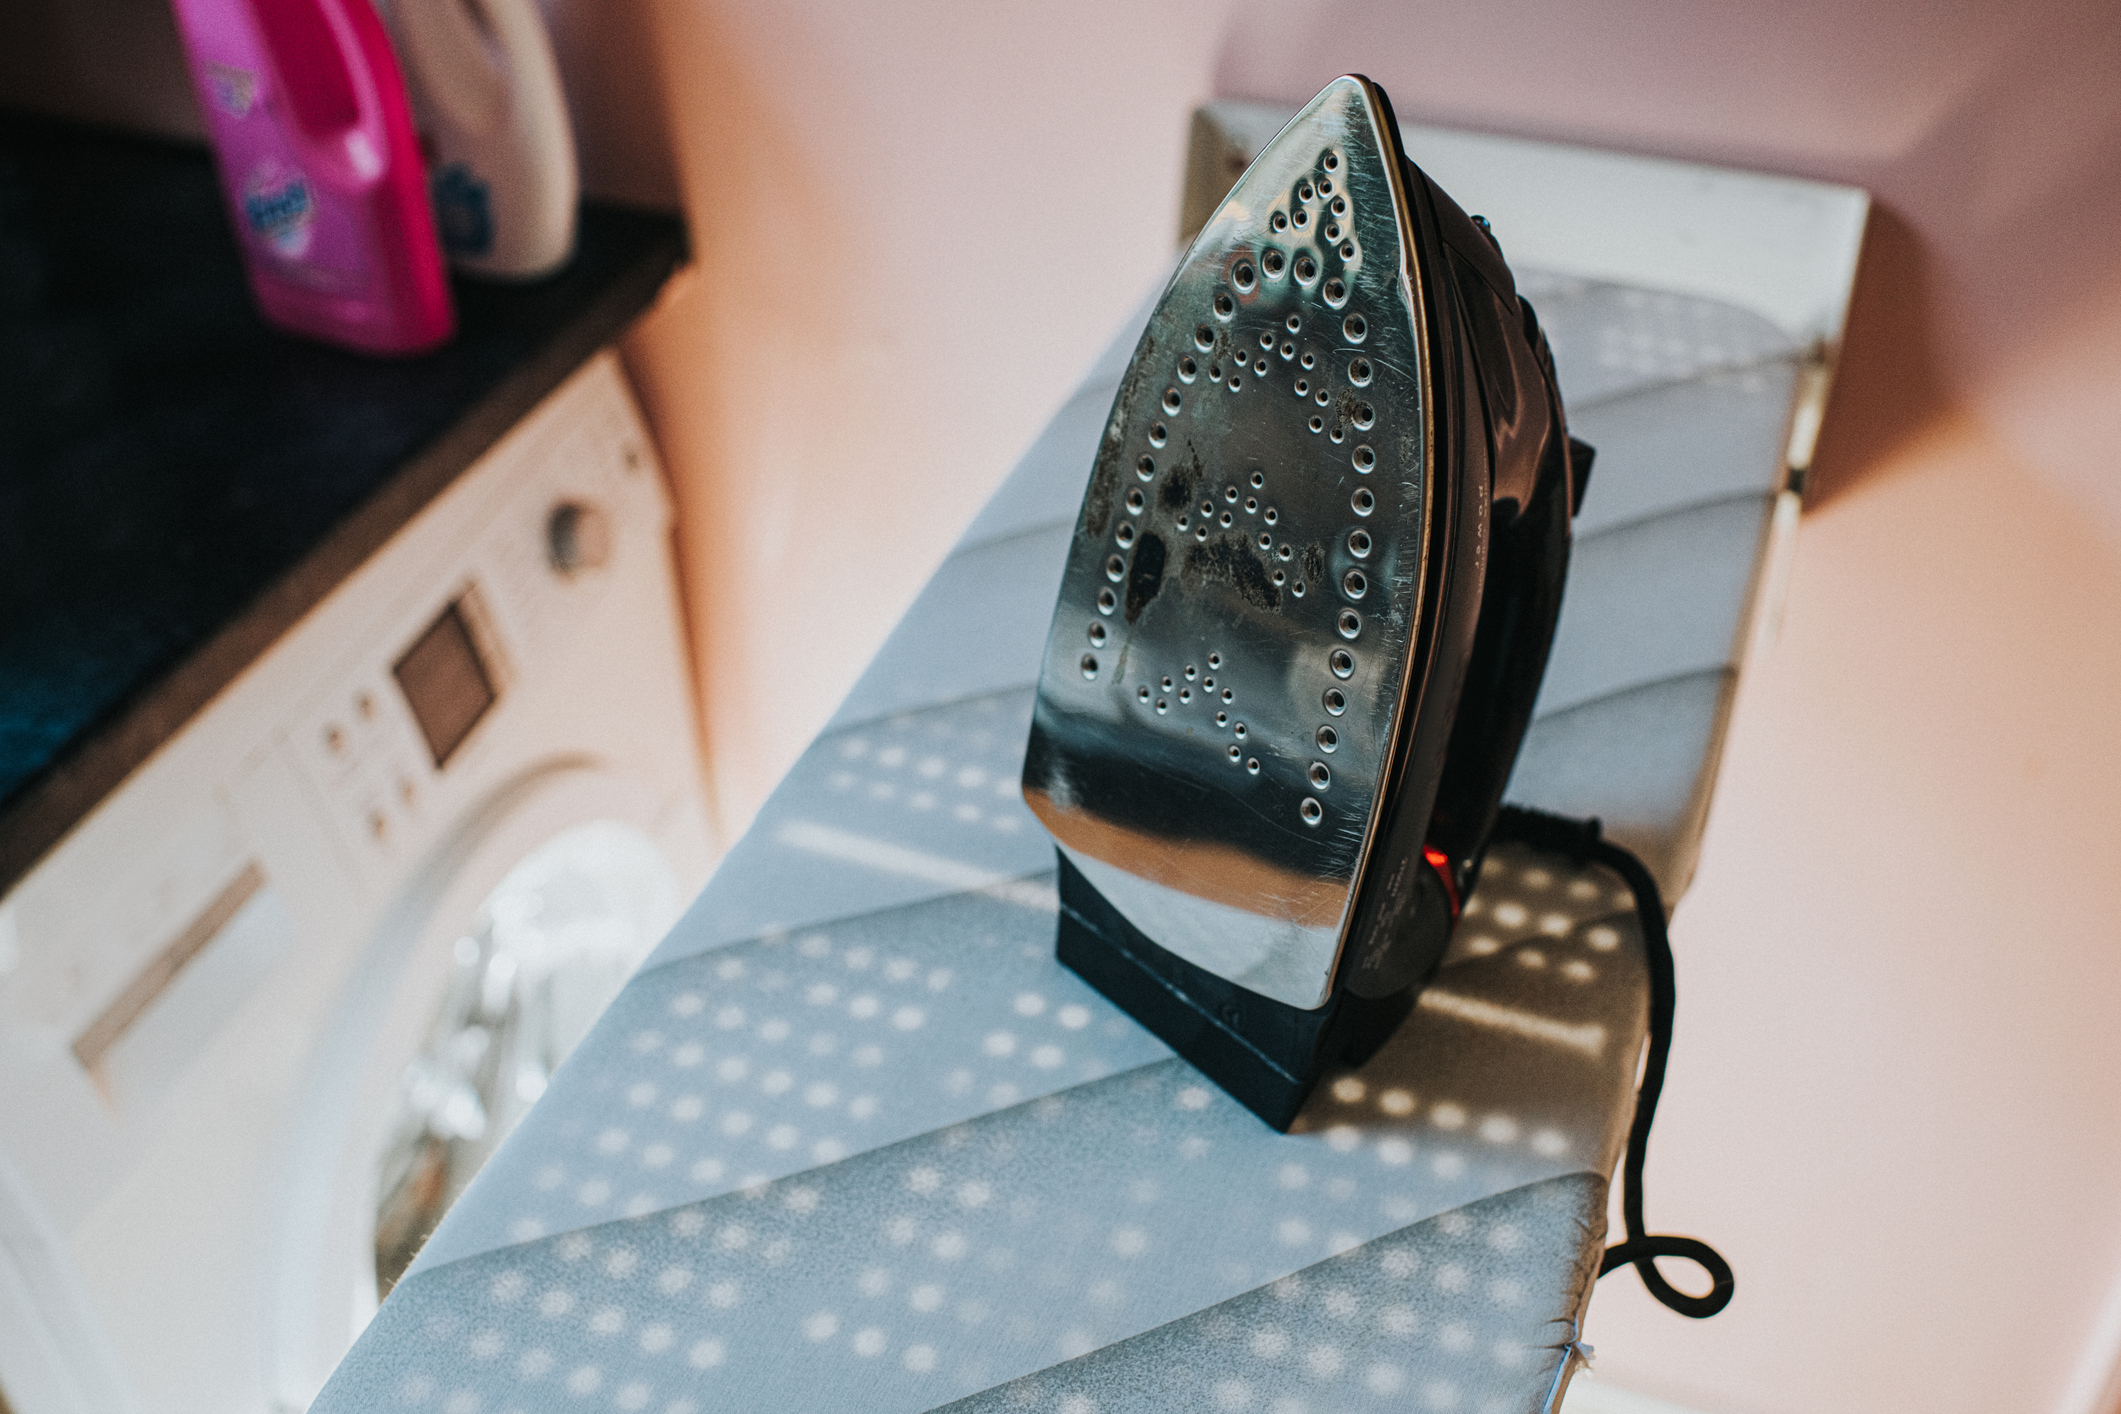 An iron on an ironing board with a washing machine in the background